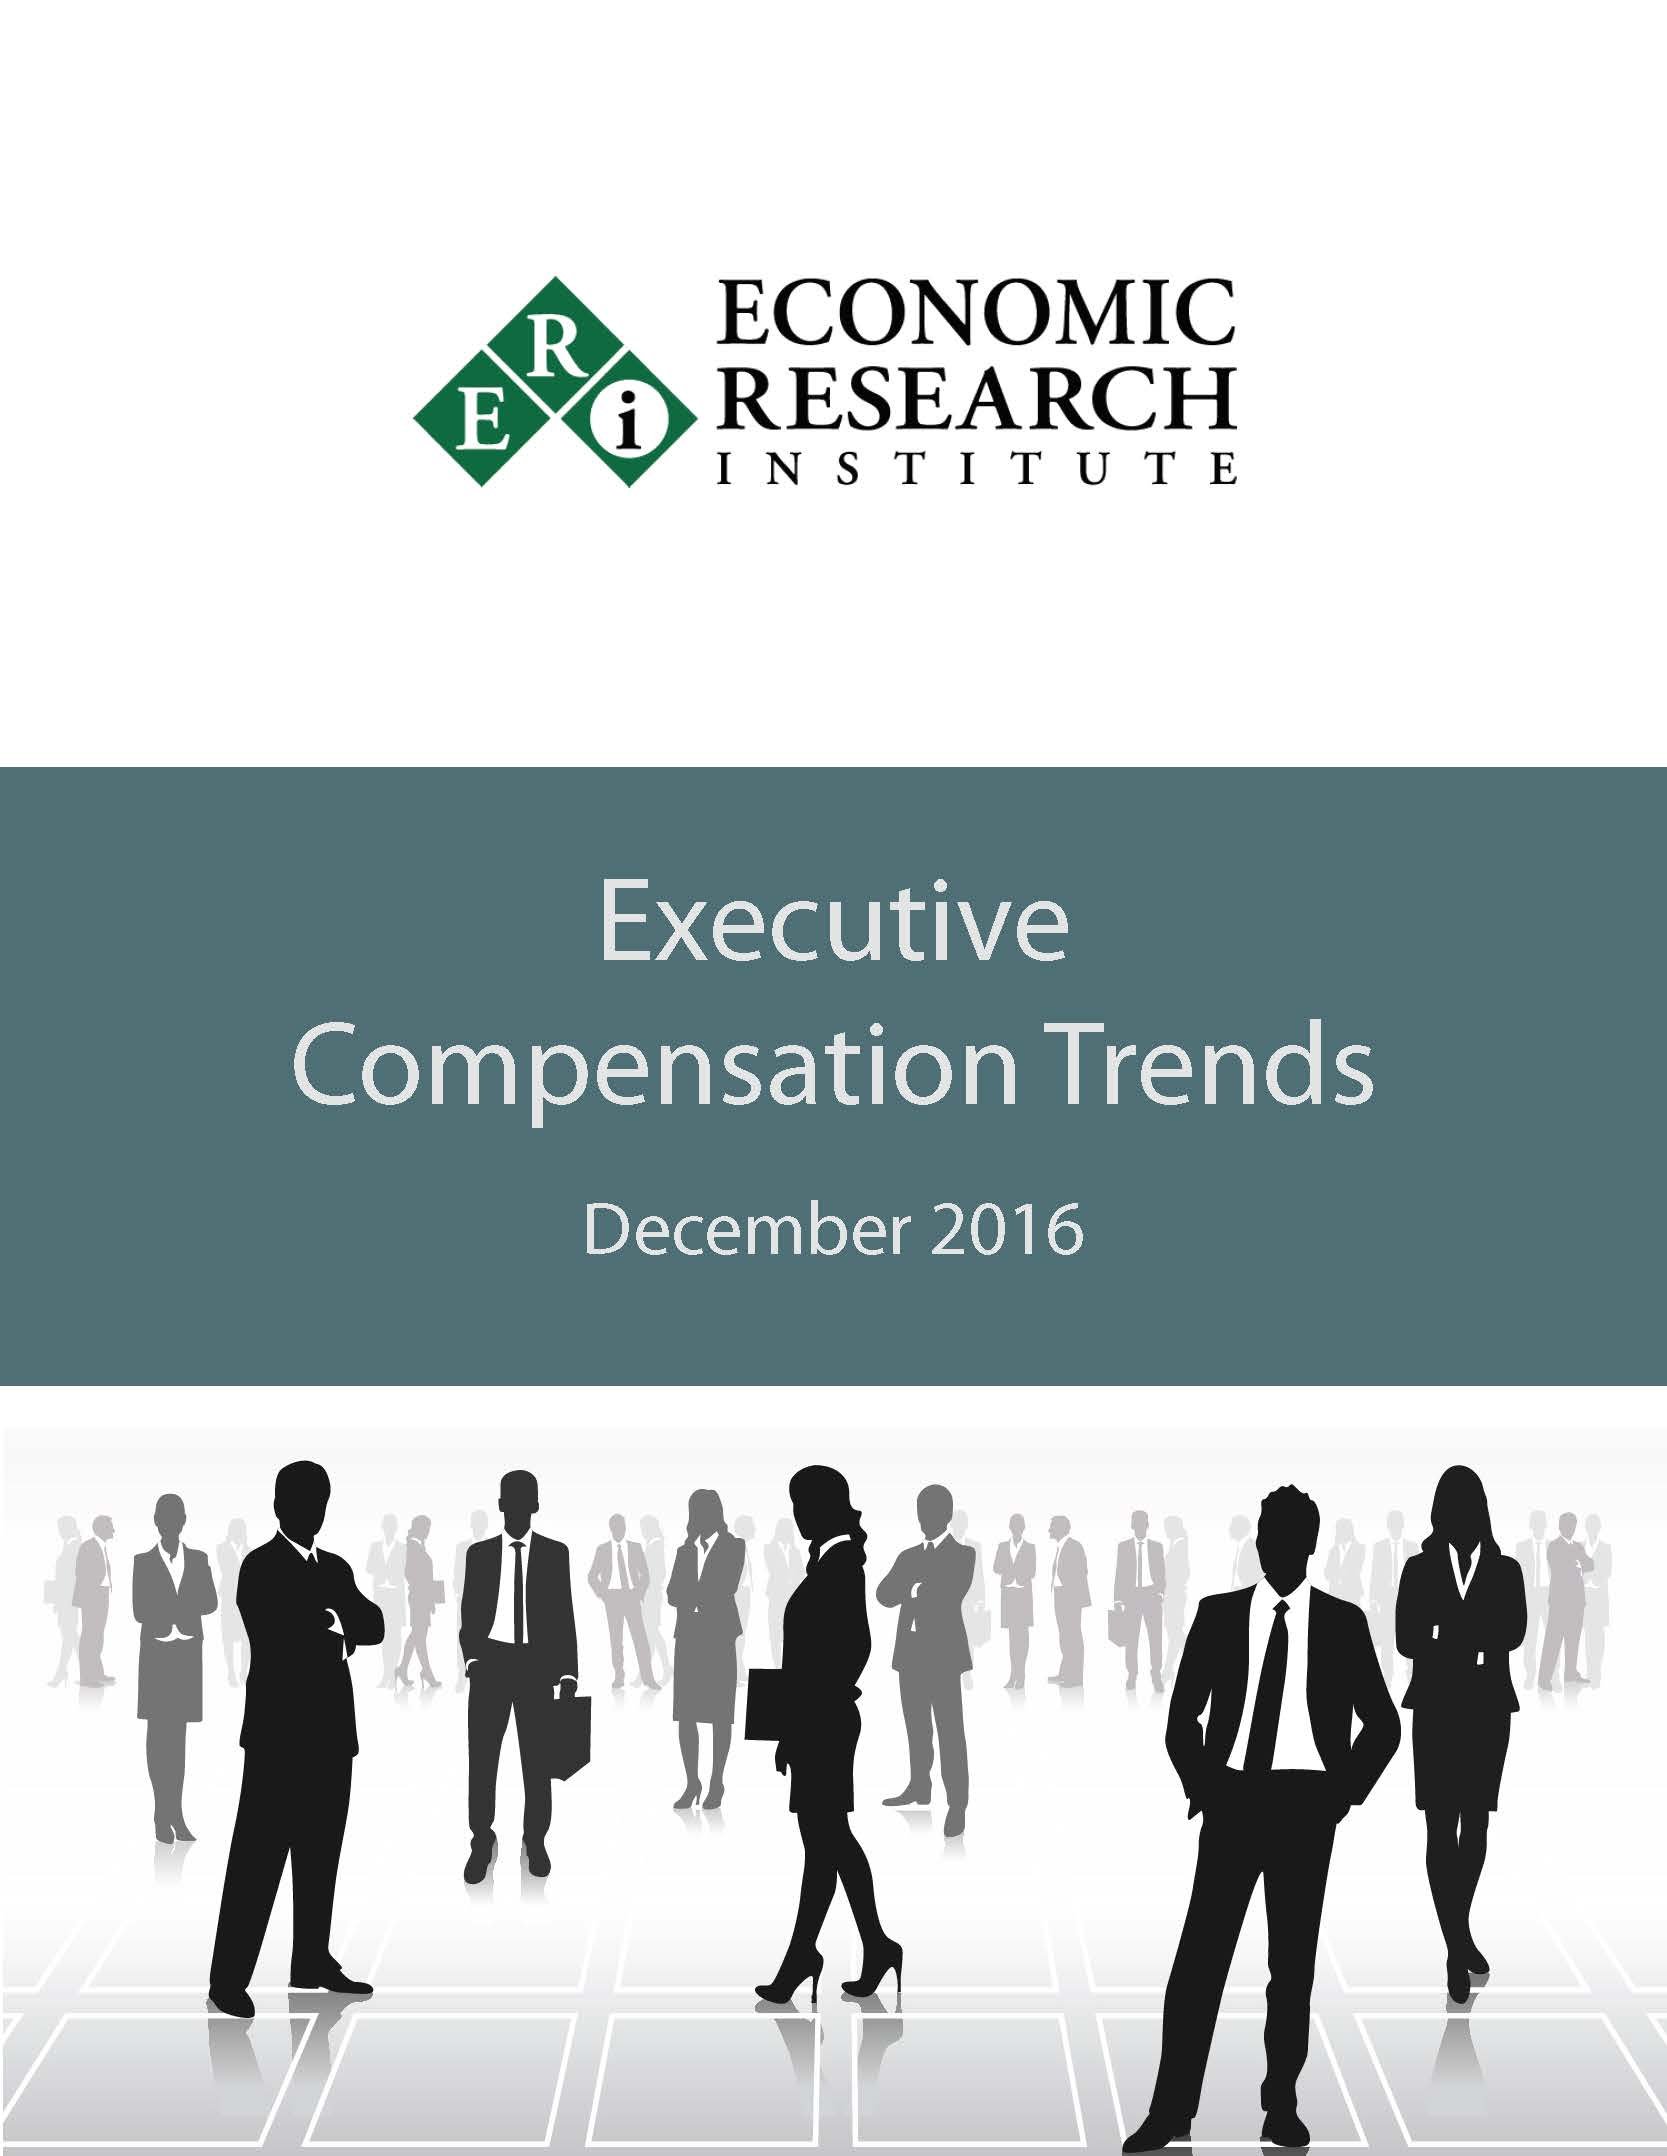 Executive Compensation Trends December 2016_Page_1